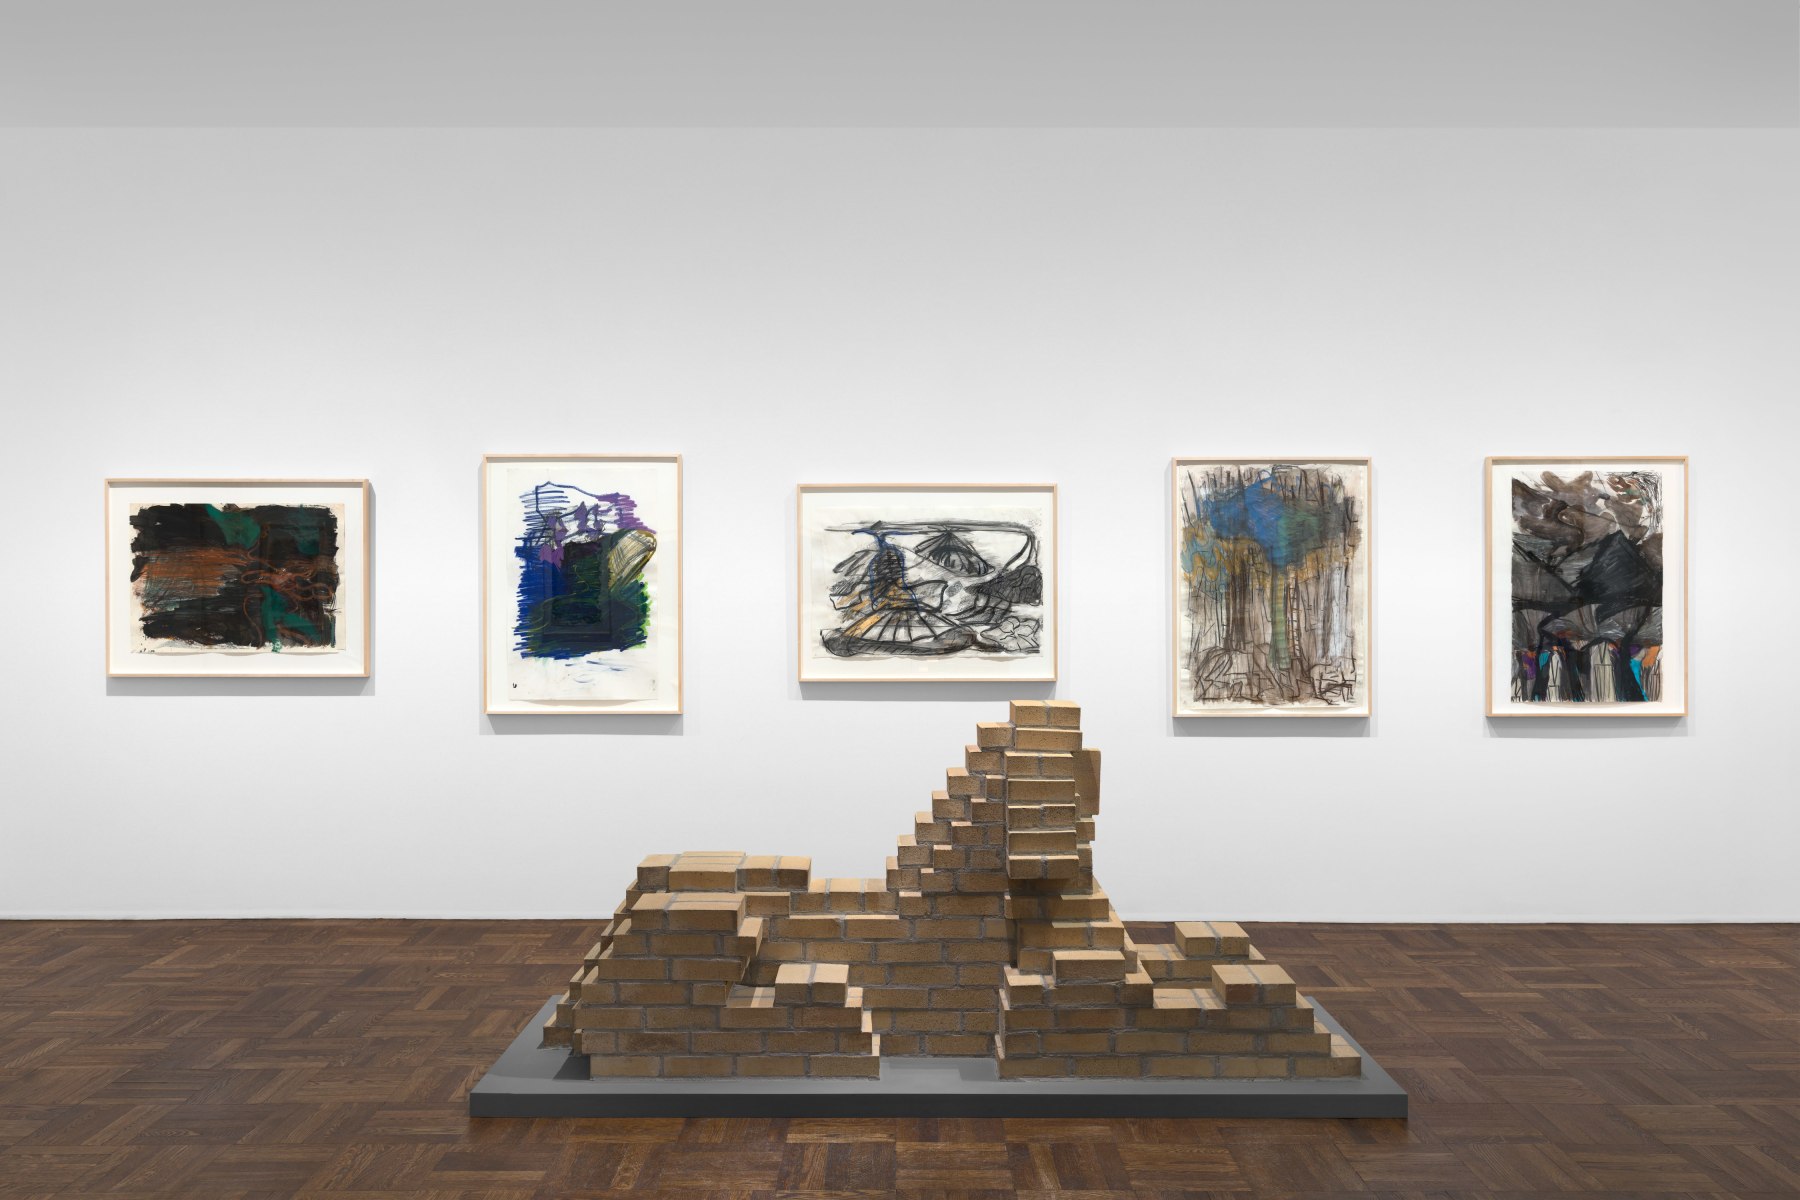 PER KIRKEBY Works on Paper, Works in Brick 20 November 2019 through 25 January 2020 UPPER EAST SIDE, NEW YORK, Installation View 8